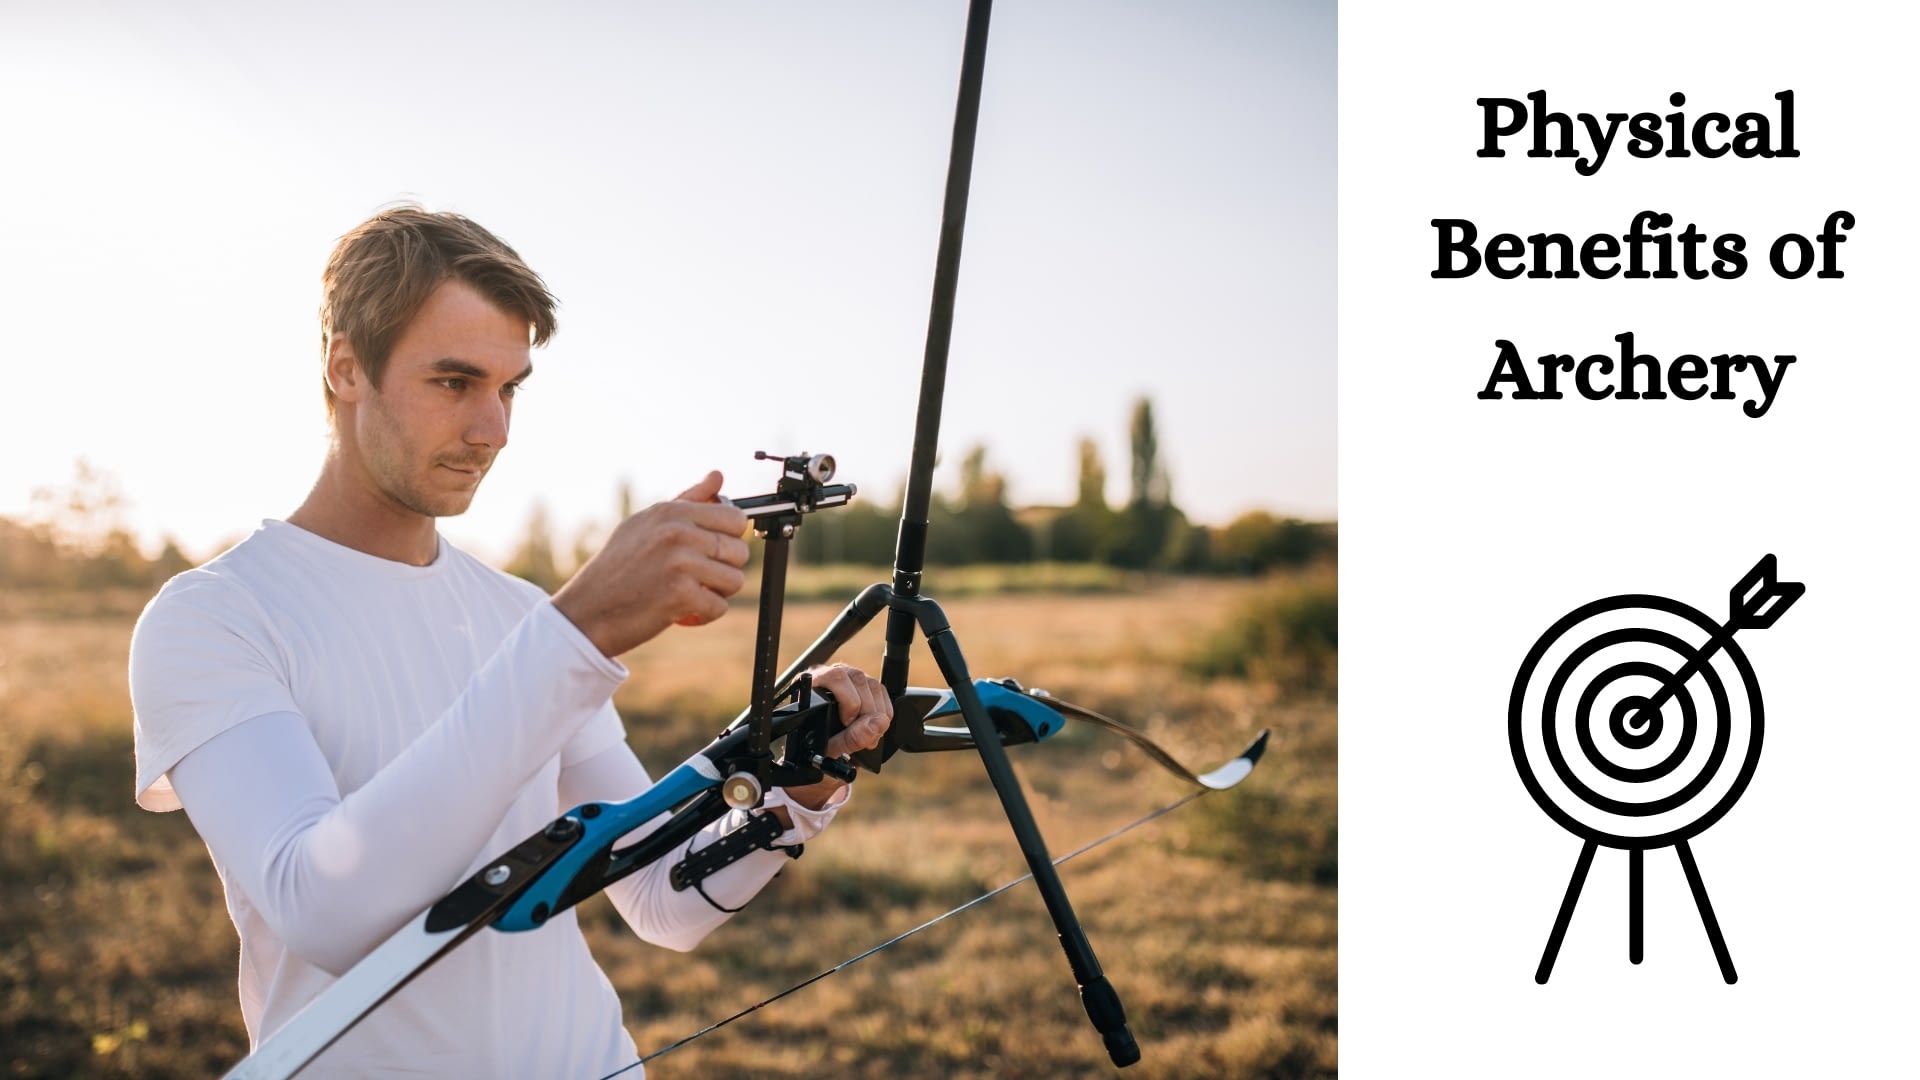 Physical Benefits of Archery